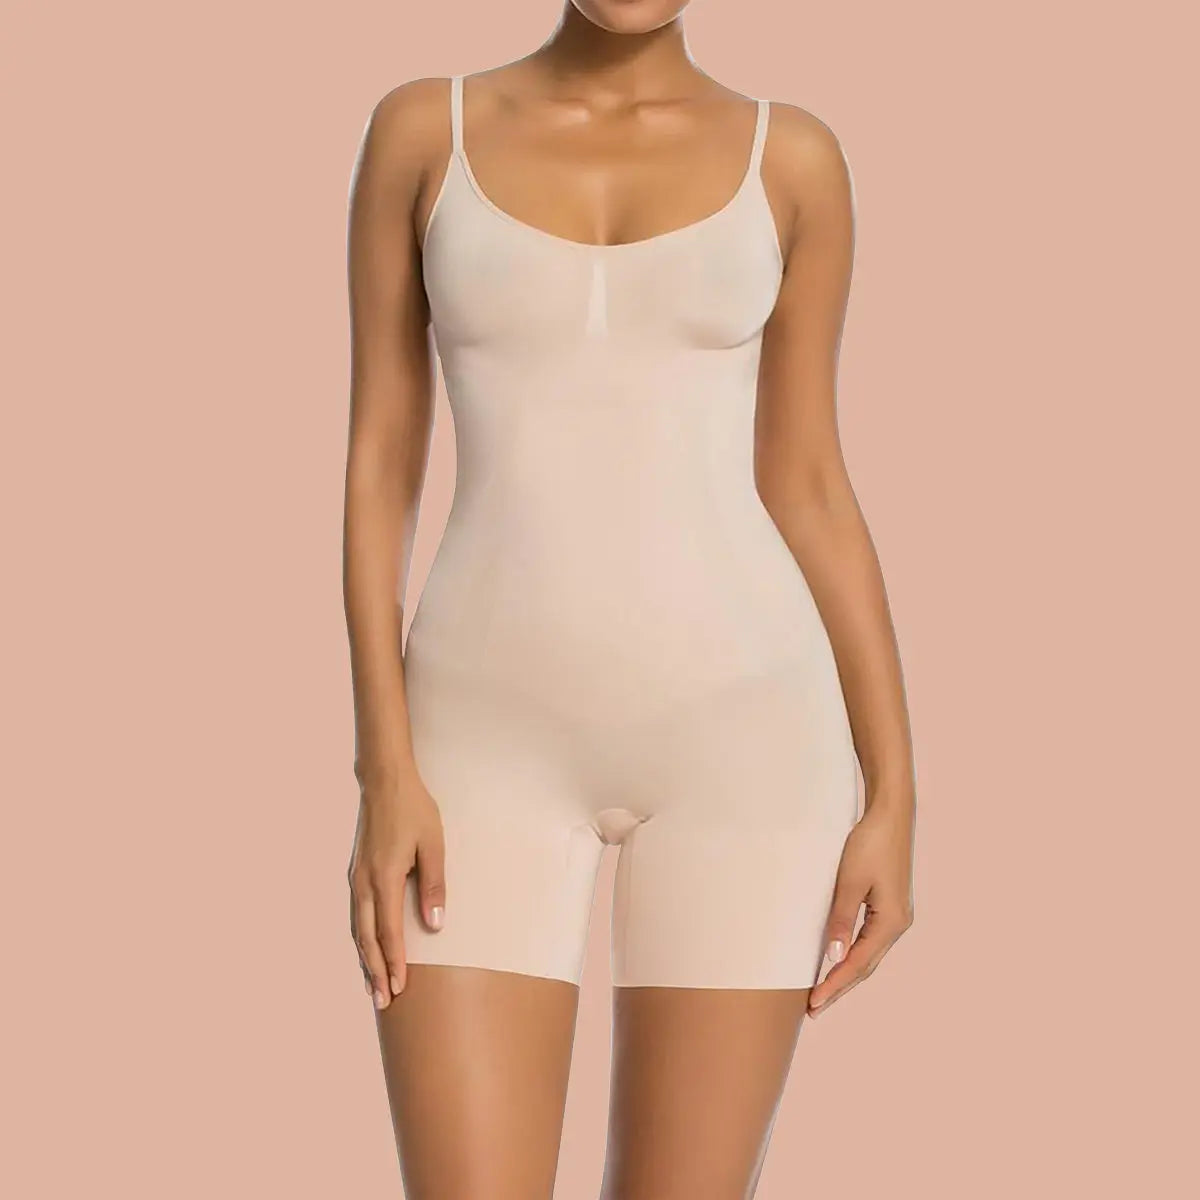 AOOCHASLIY Shapewear for Women Reduce Price Seamless Shapewear Camisoles  One-Piece Abdominal Lifter Hip Shaper Stretch Slimming Body Corset